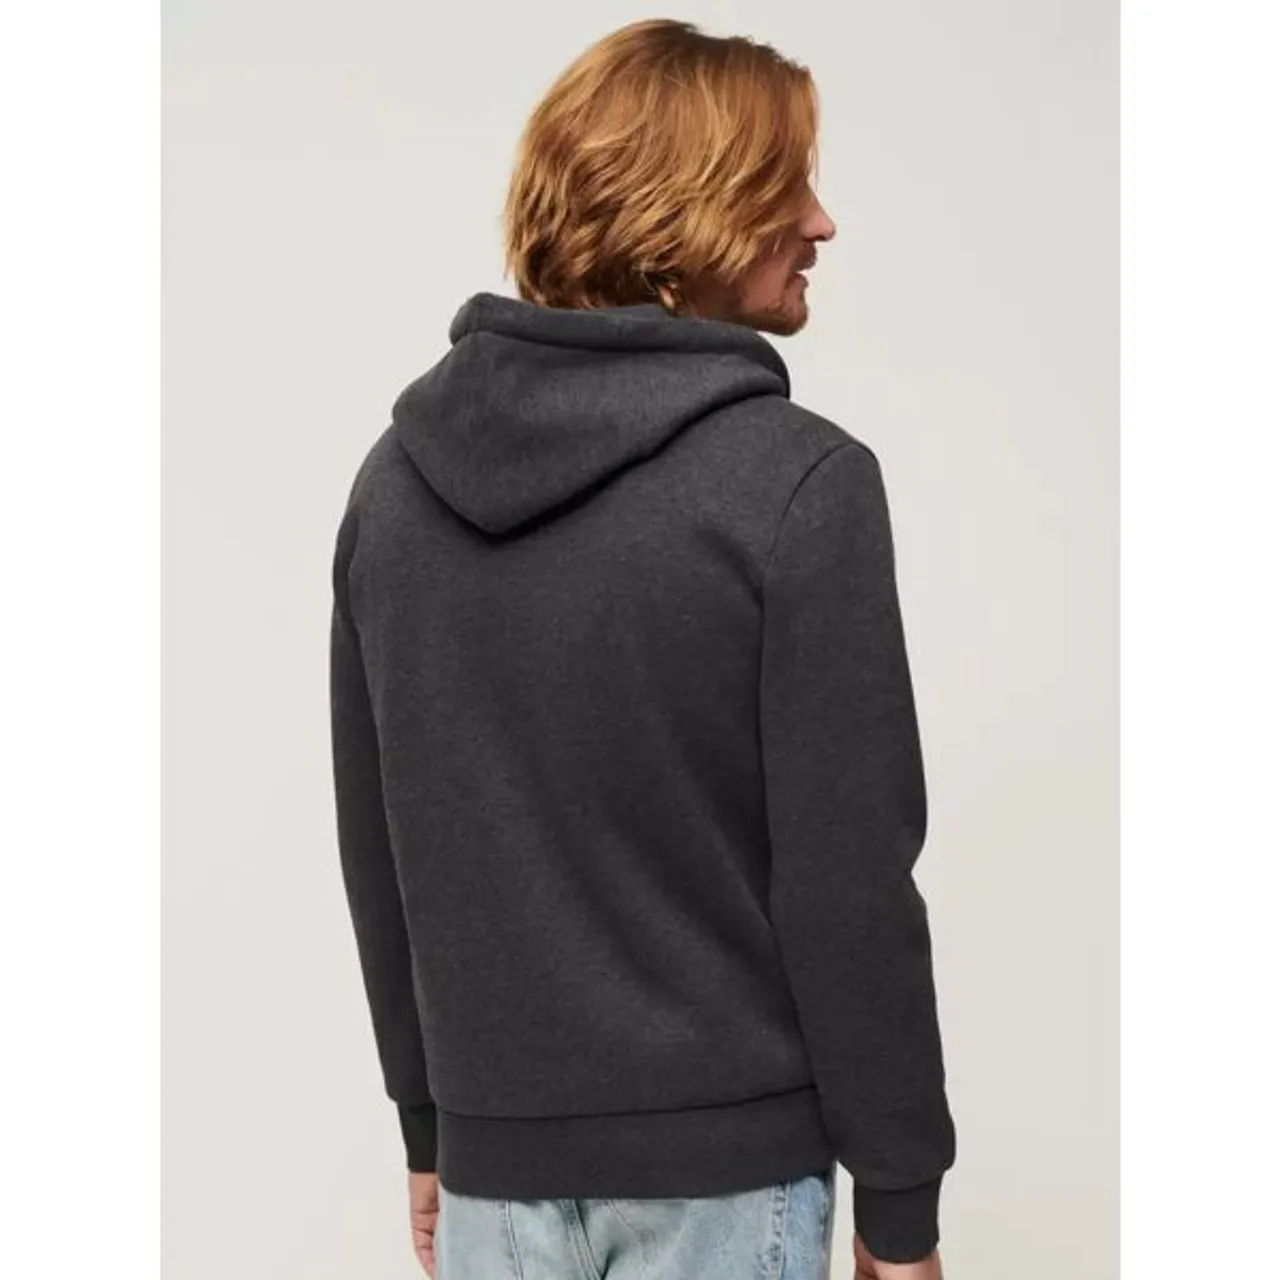 Superdry Neon Vintage Logo Embroidered Hoodie - Charcoal Marl - Male